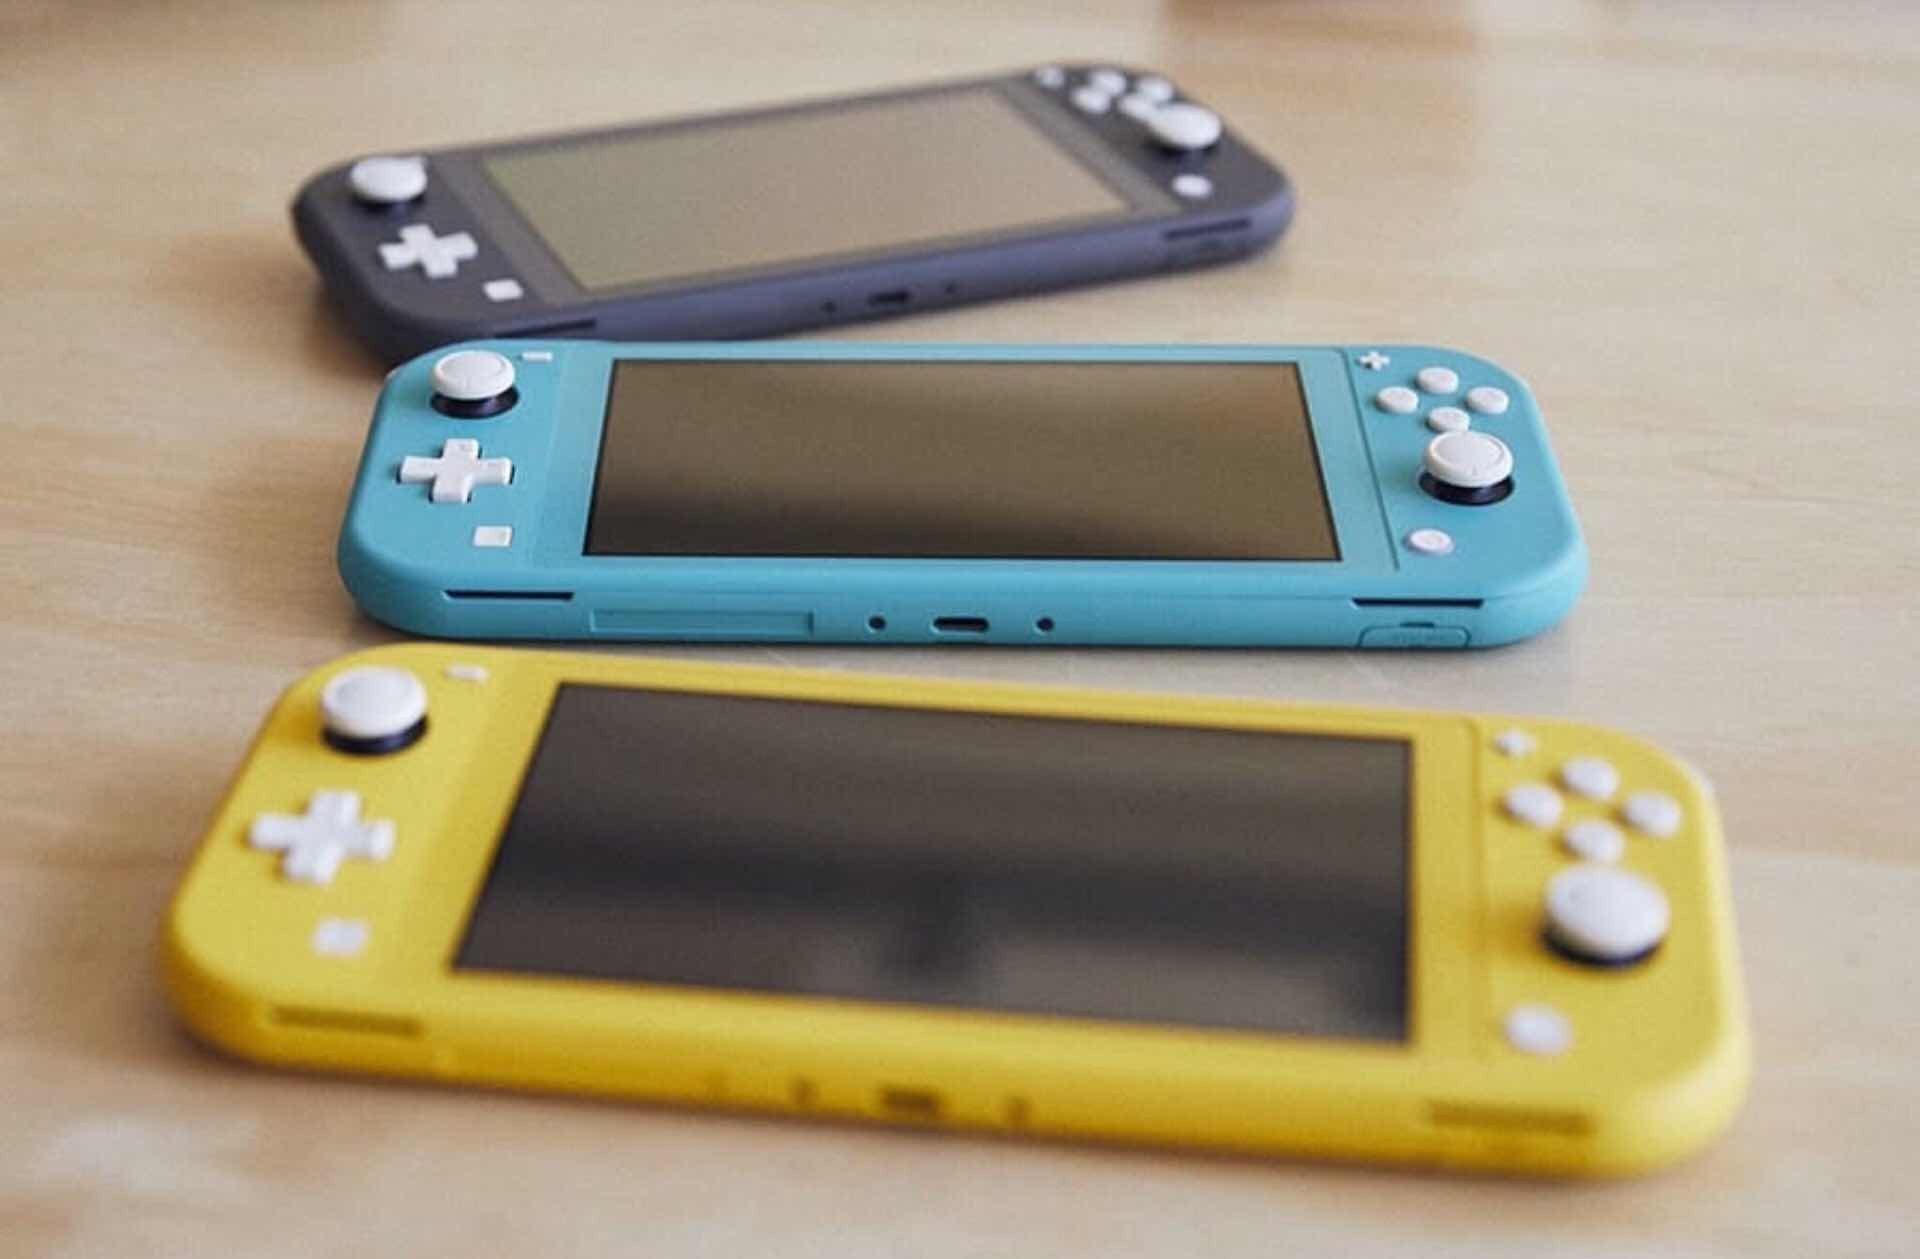 The Nintendo Switch Lite mobile game console. ($200, available in gray, turquoise, and yellow)